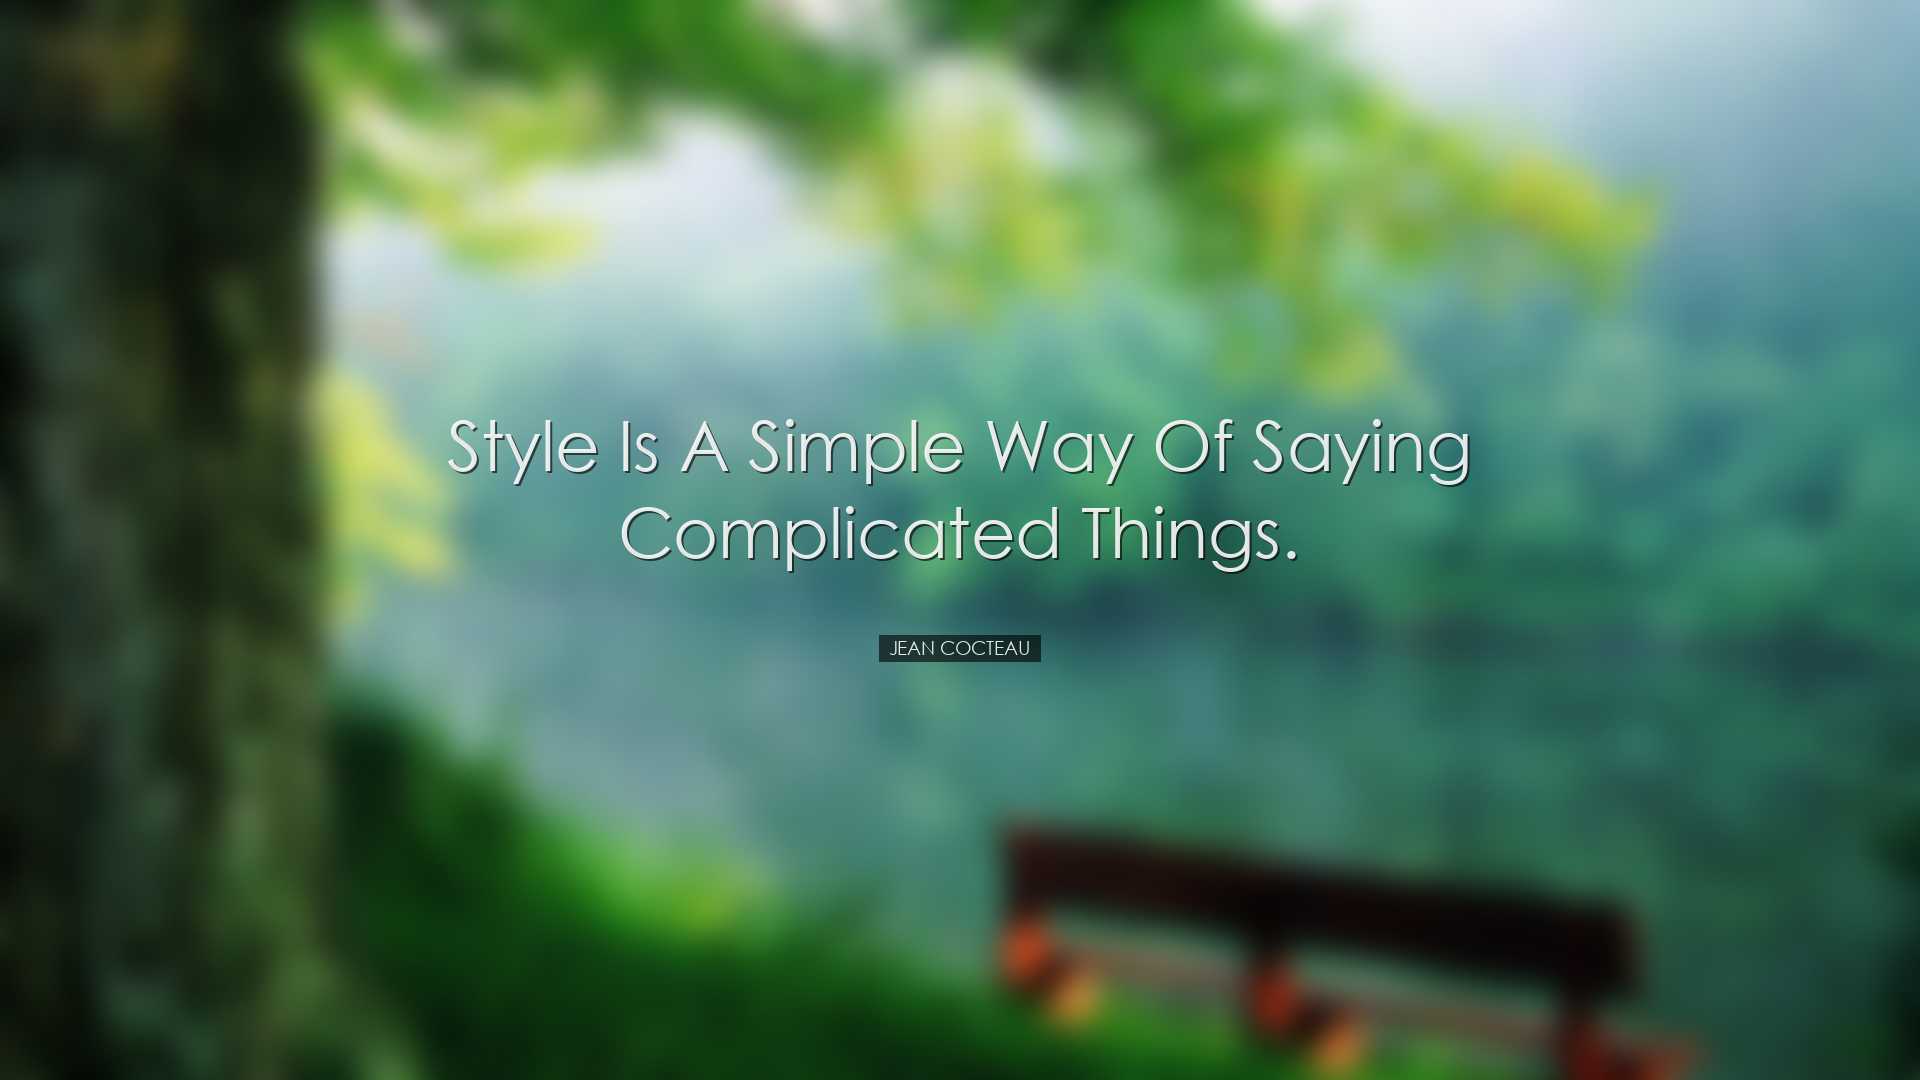 Style is a simple way of saying complicated things. - Jean Cocteau